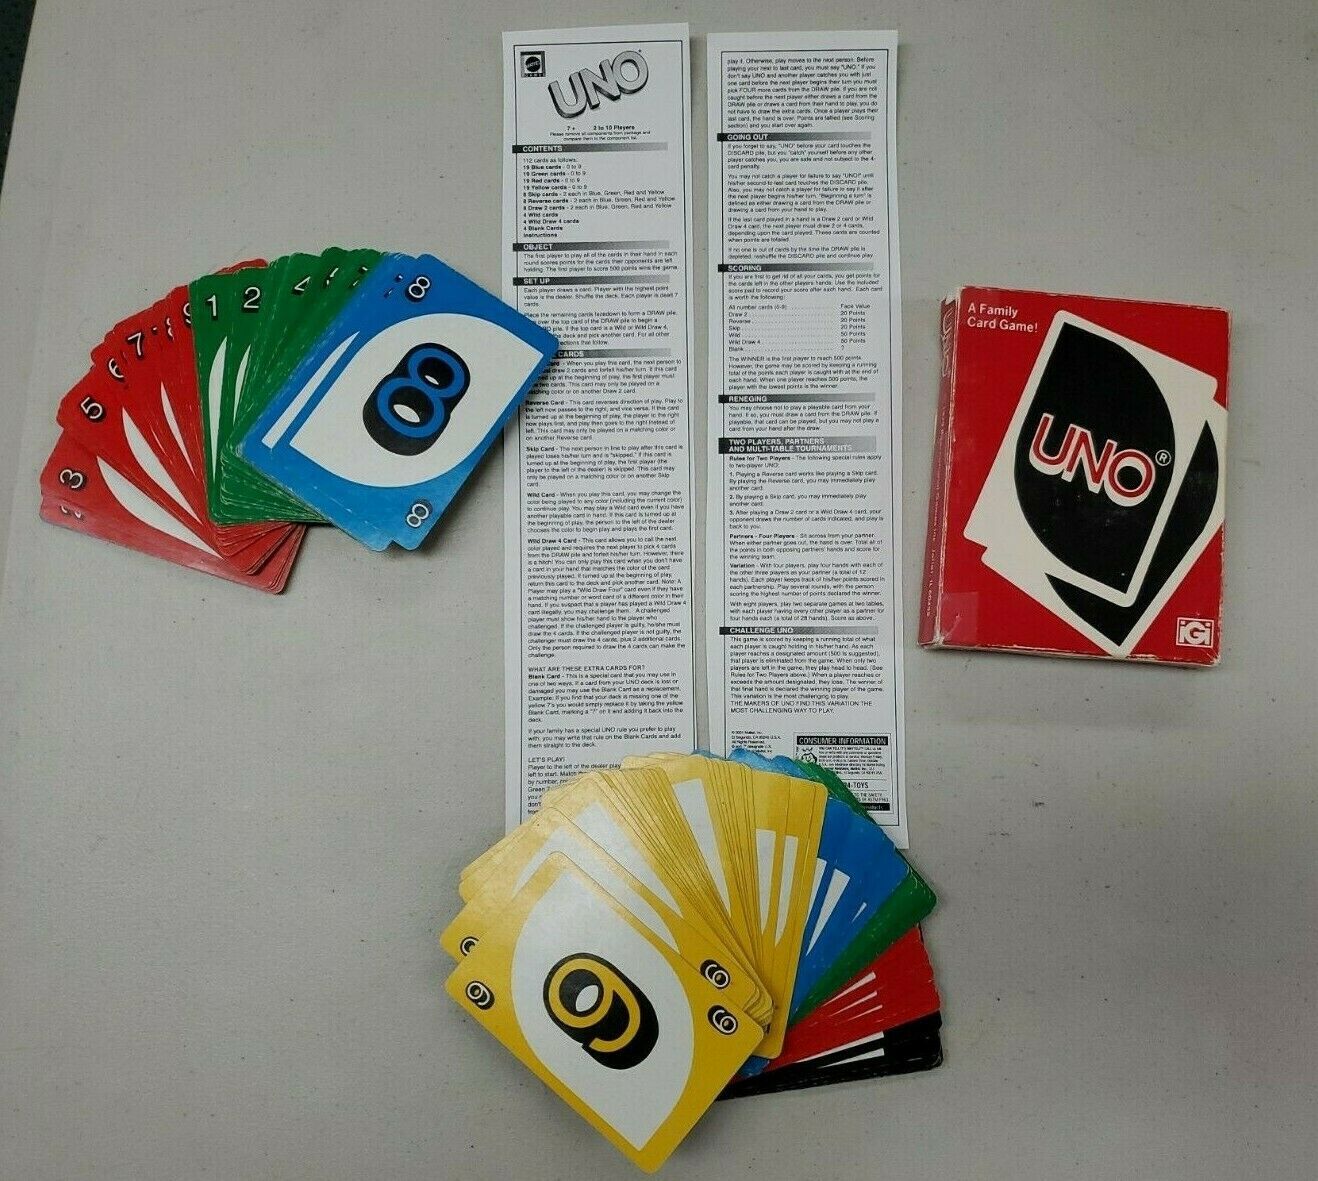 UNO DELUXE Edition 2001 Mattel Card Game Brand NEW India